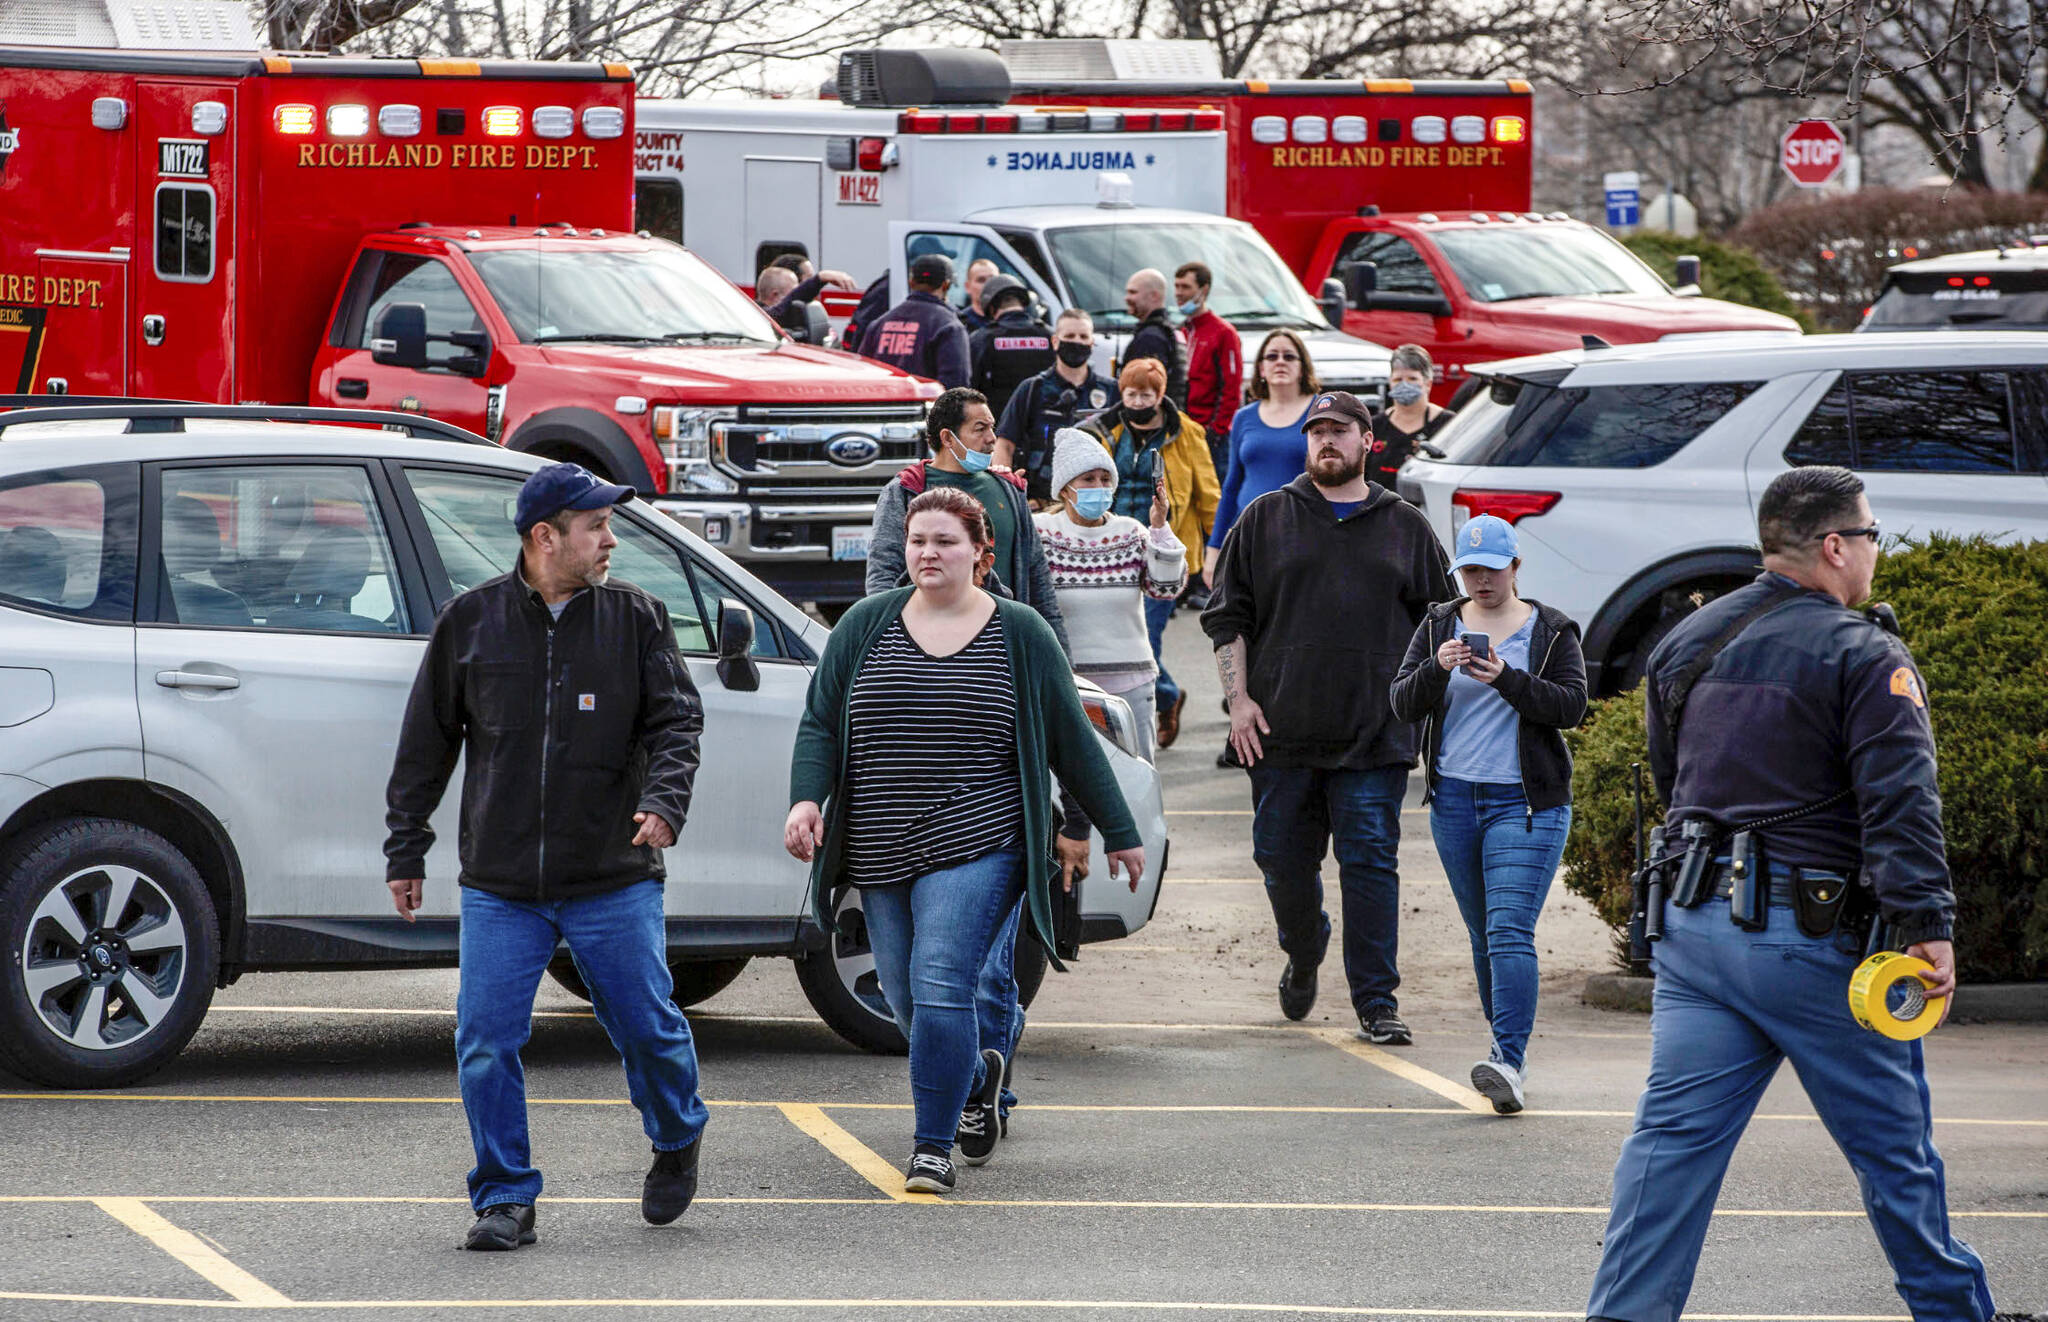 Customers and employees are guided out of a Fred Meyer grocery store after a fatal shooting at the business on Wellsian Way in Richland, Wash., Monday, Feb. 7, 2022. (Jennifer King/The News Tribune via AP)